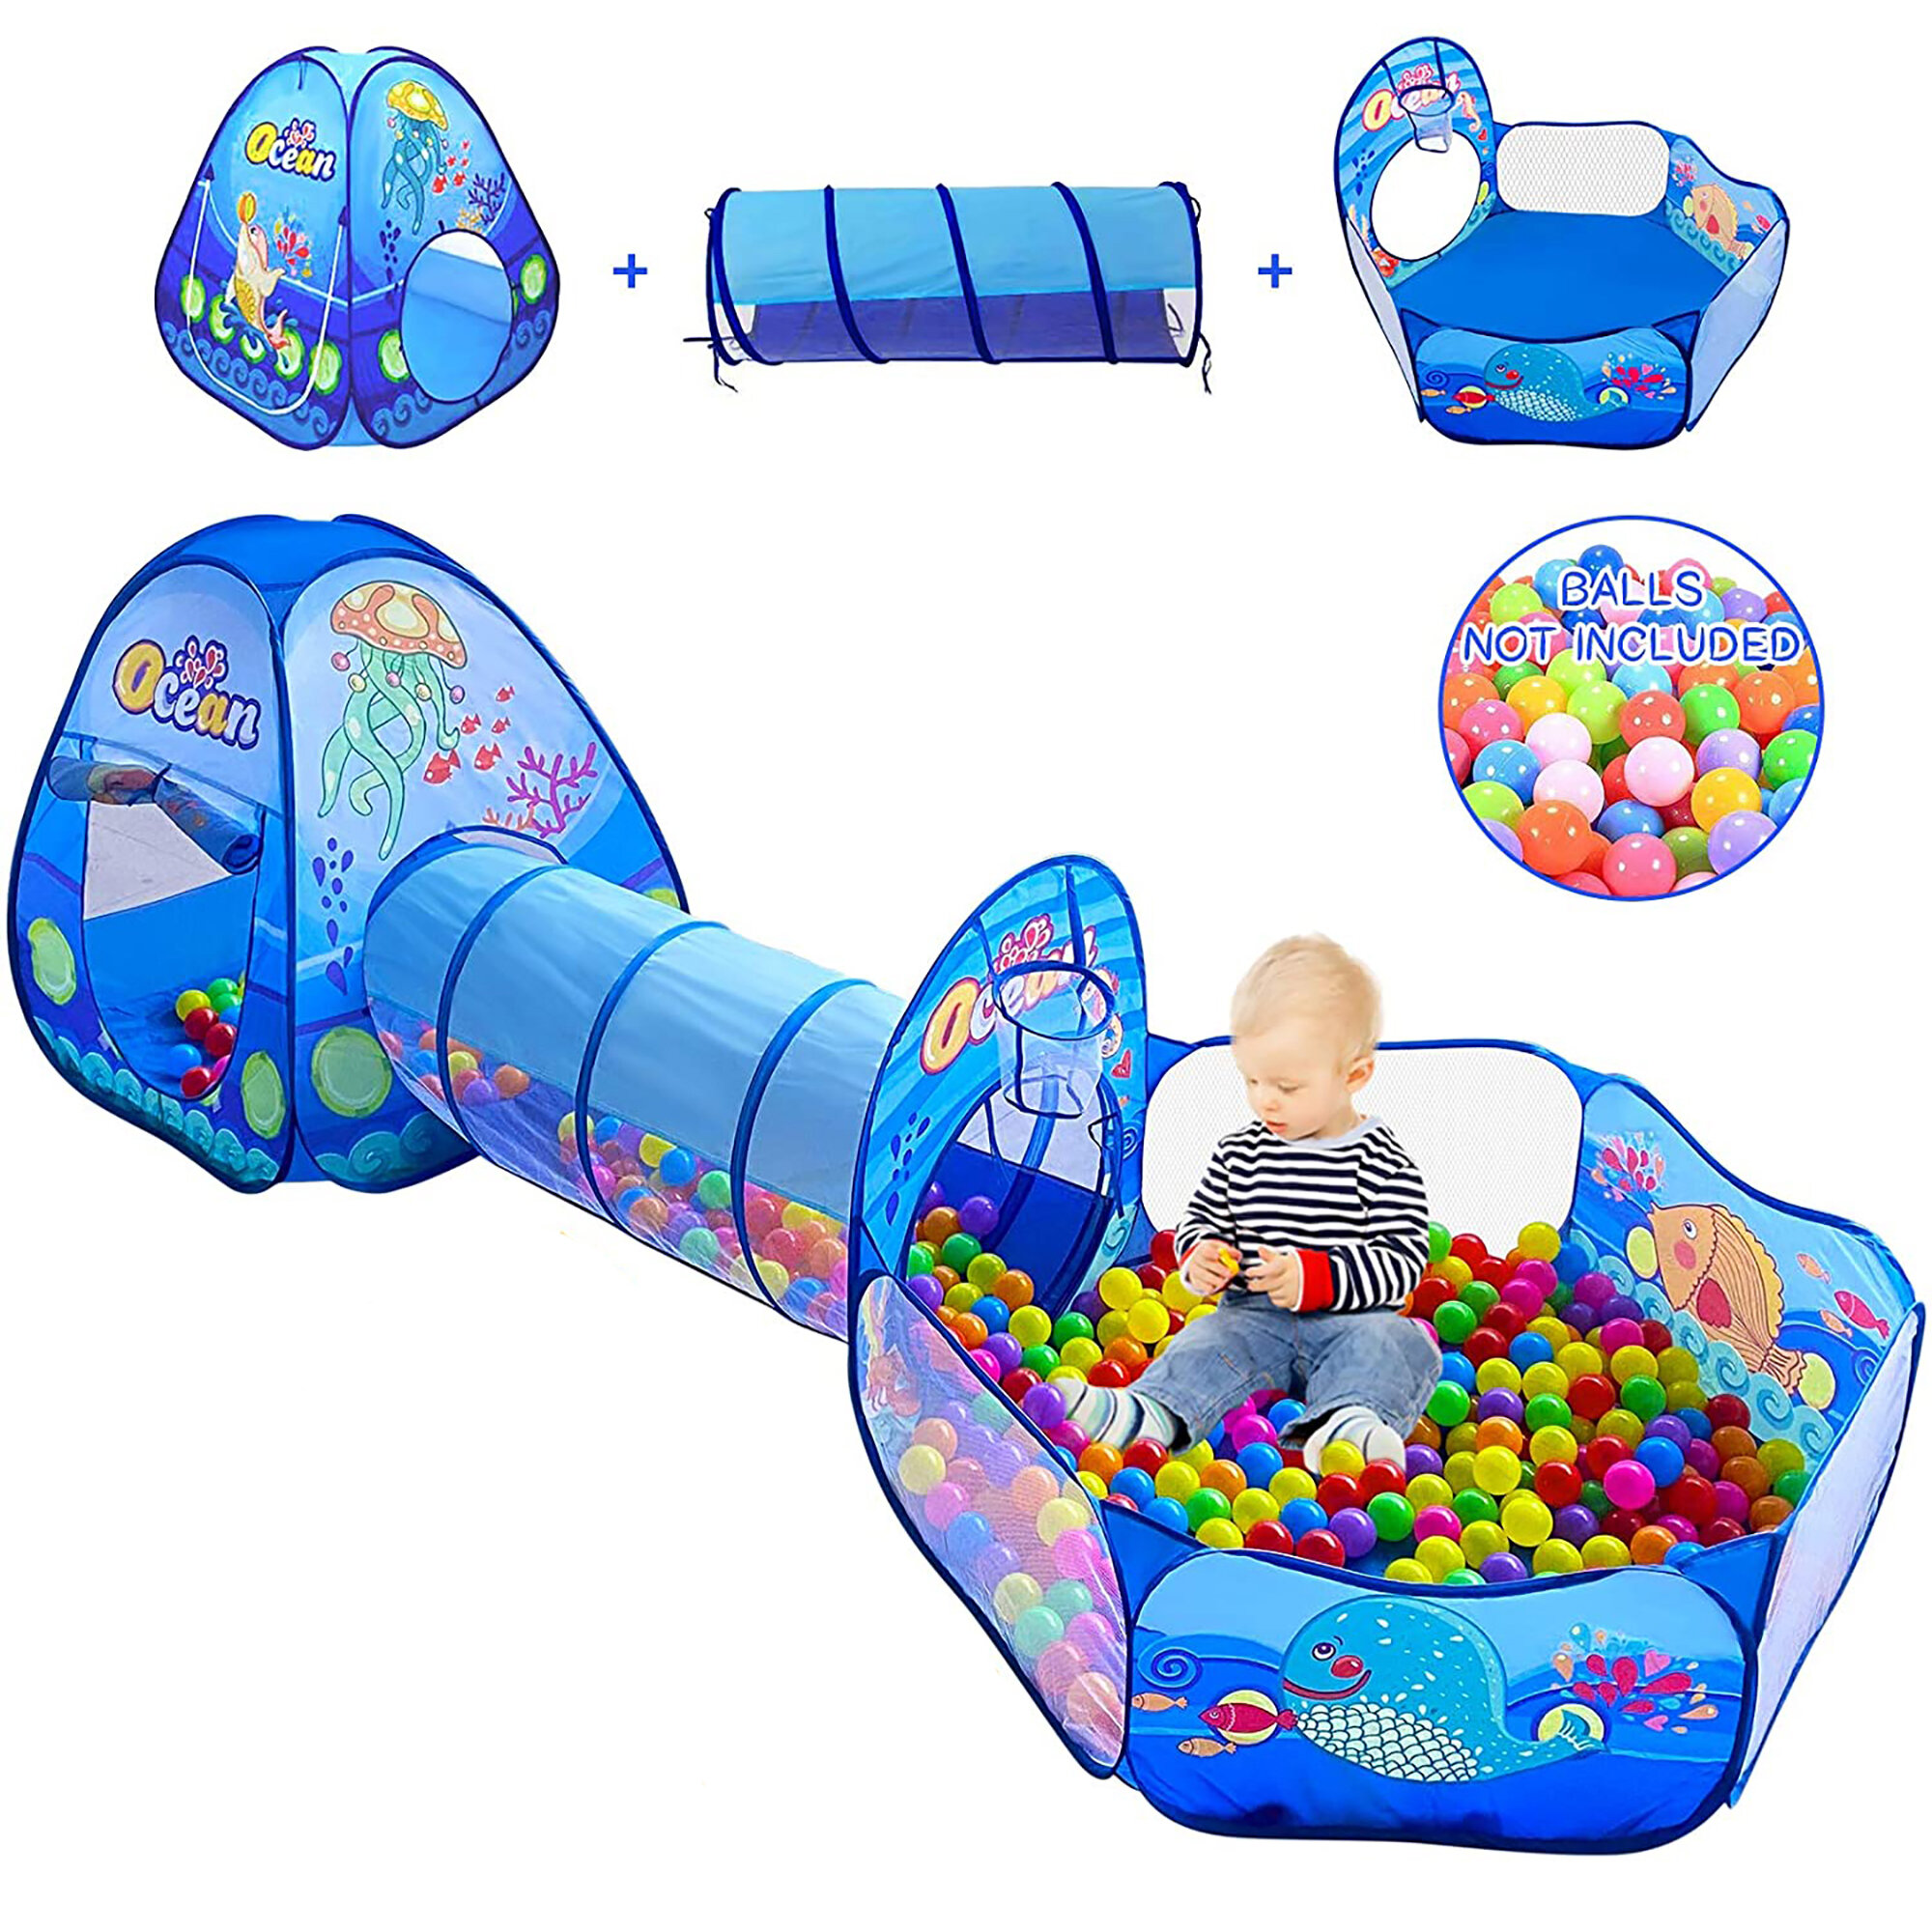 Portable Toddler Kids Play Tent House Crawl Tunnel 3 in 1 Ball Pit In/Outdoor 